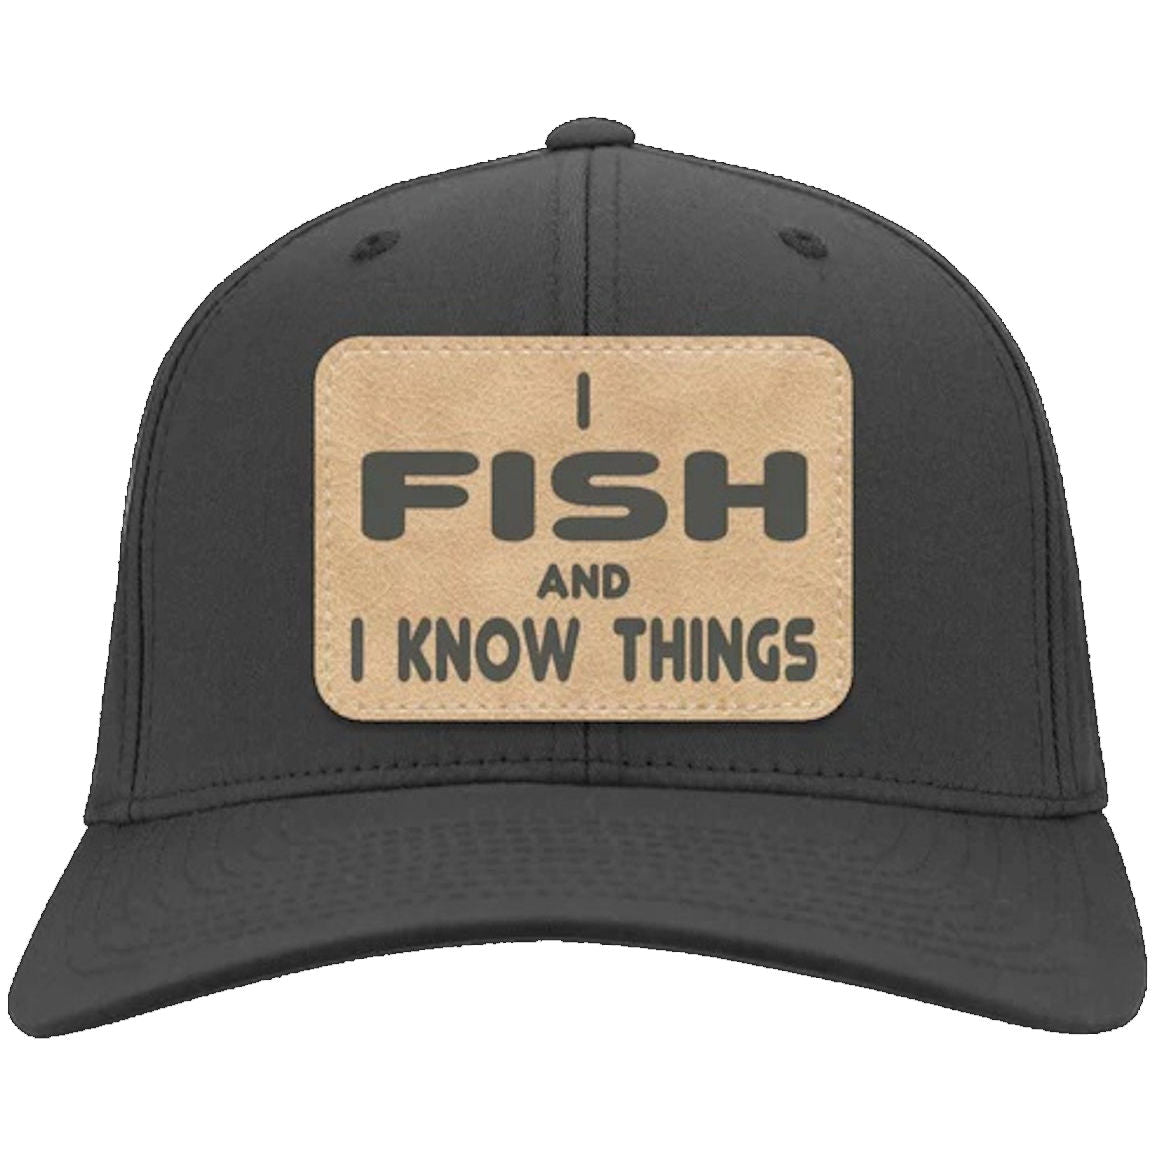 I Fish and Know Things Twill Cap charcoal